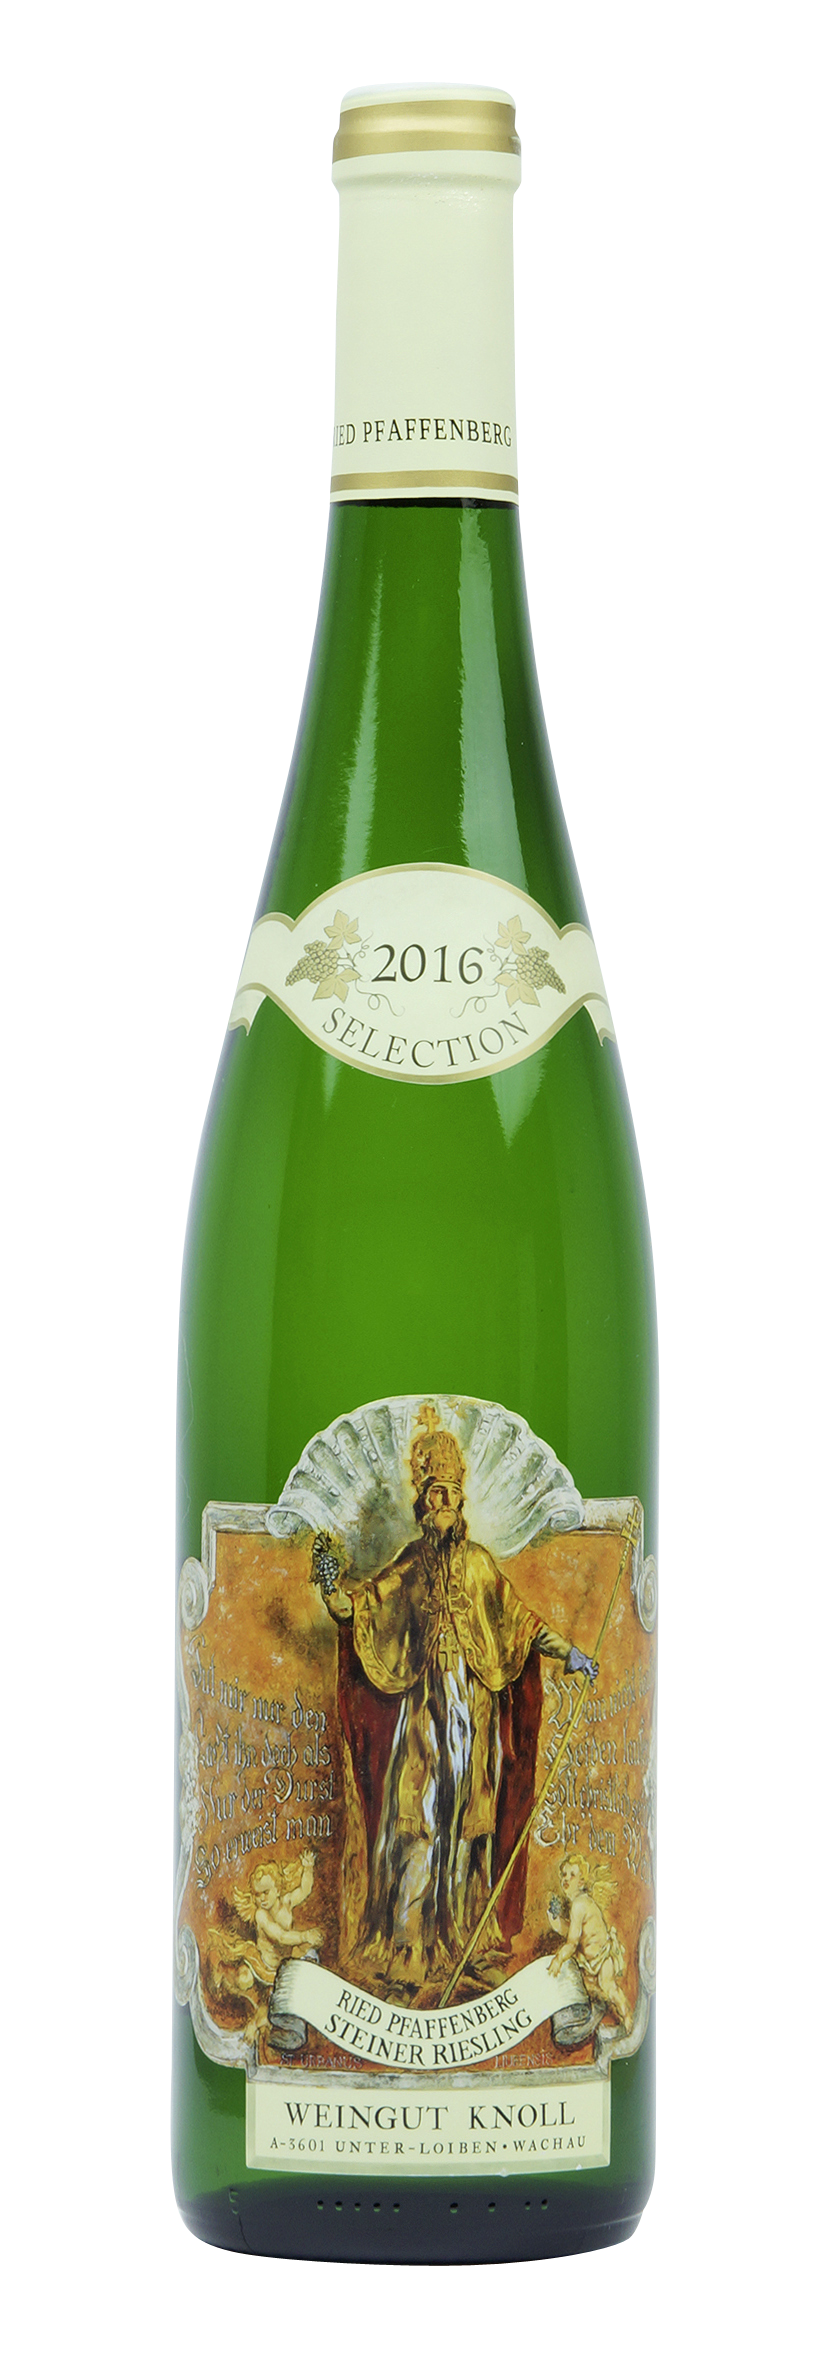 Ried Pfaffenberg Steiner Riesling Selection 2016